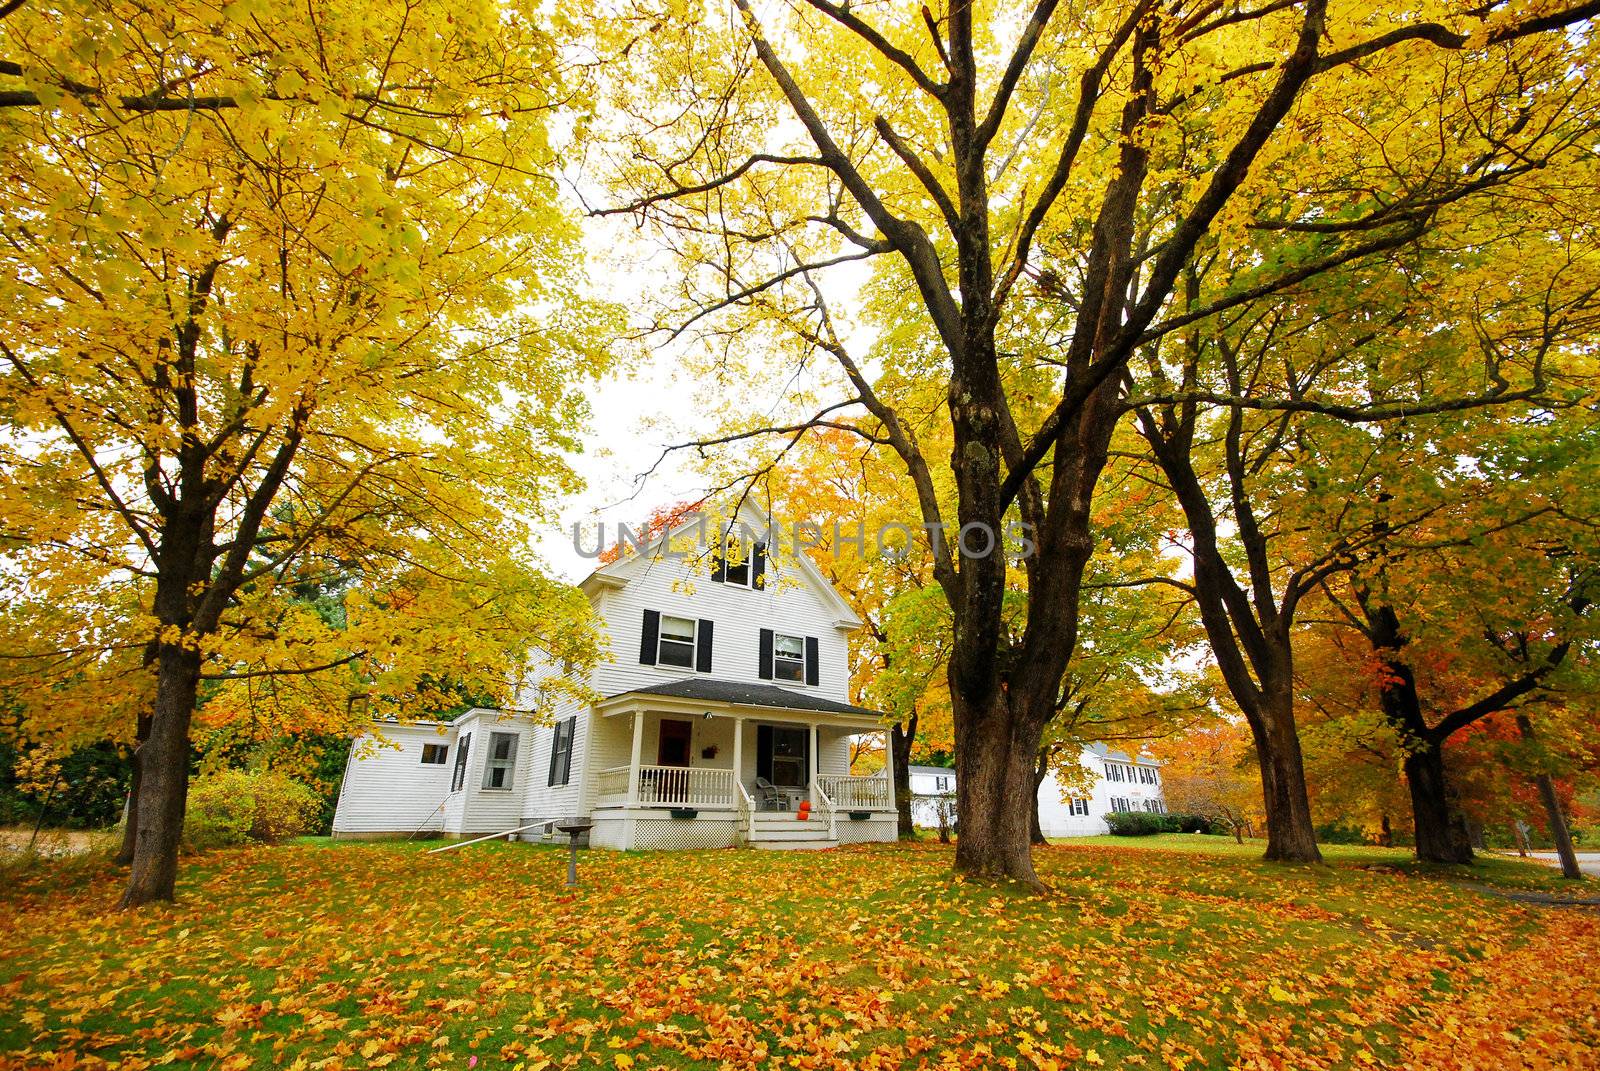 A  house sits under a big colorful tree.